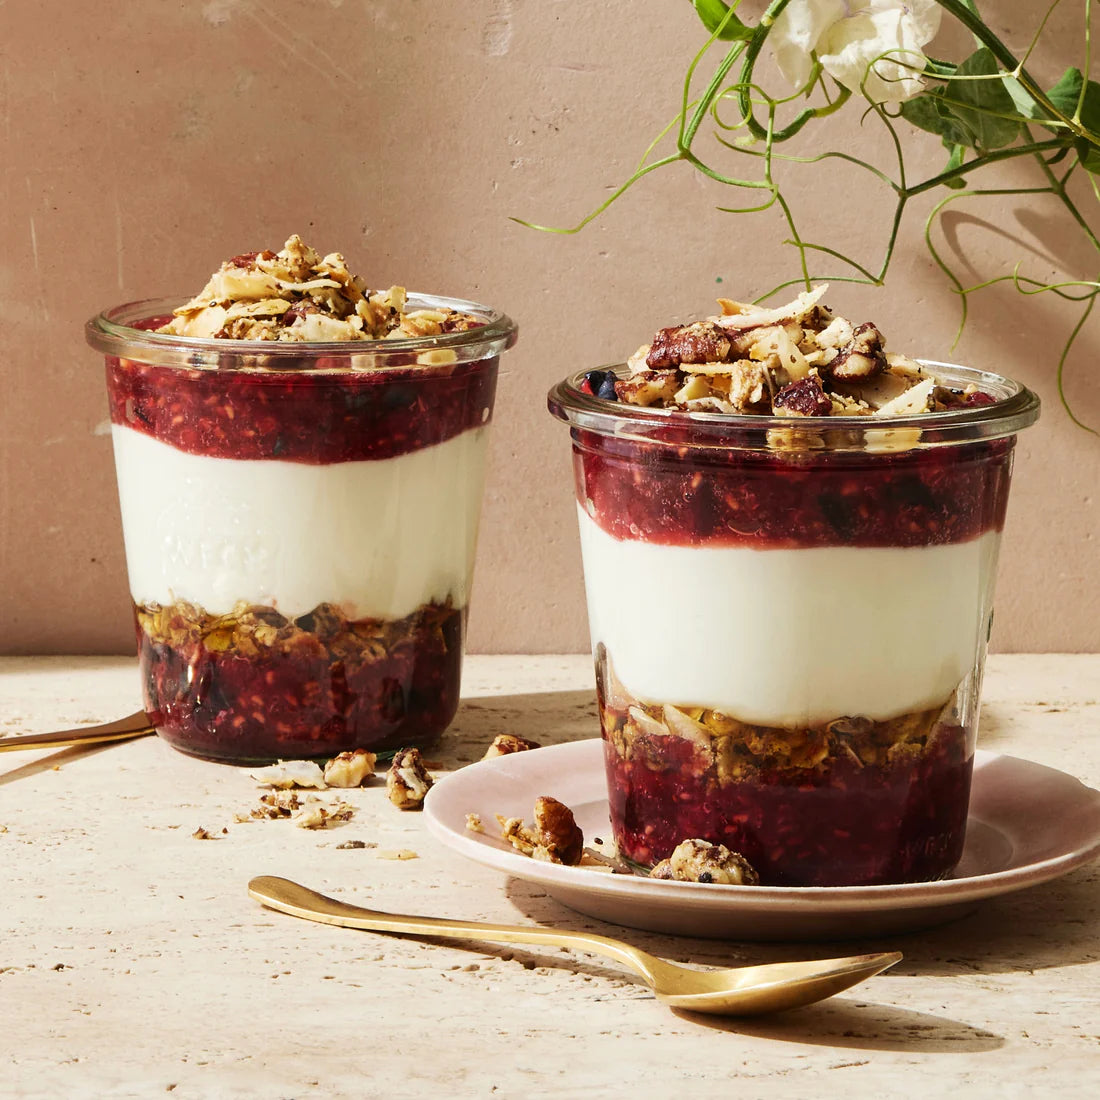 A layered parfait topped with Struesli's organic granola for satisfying crunch.